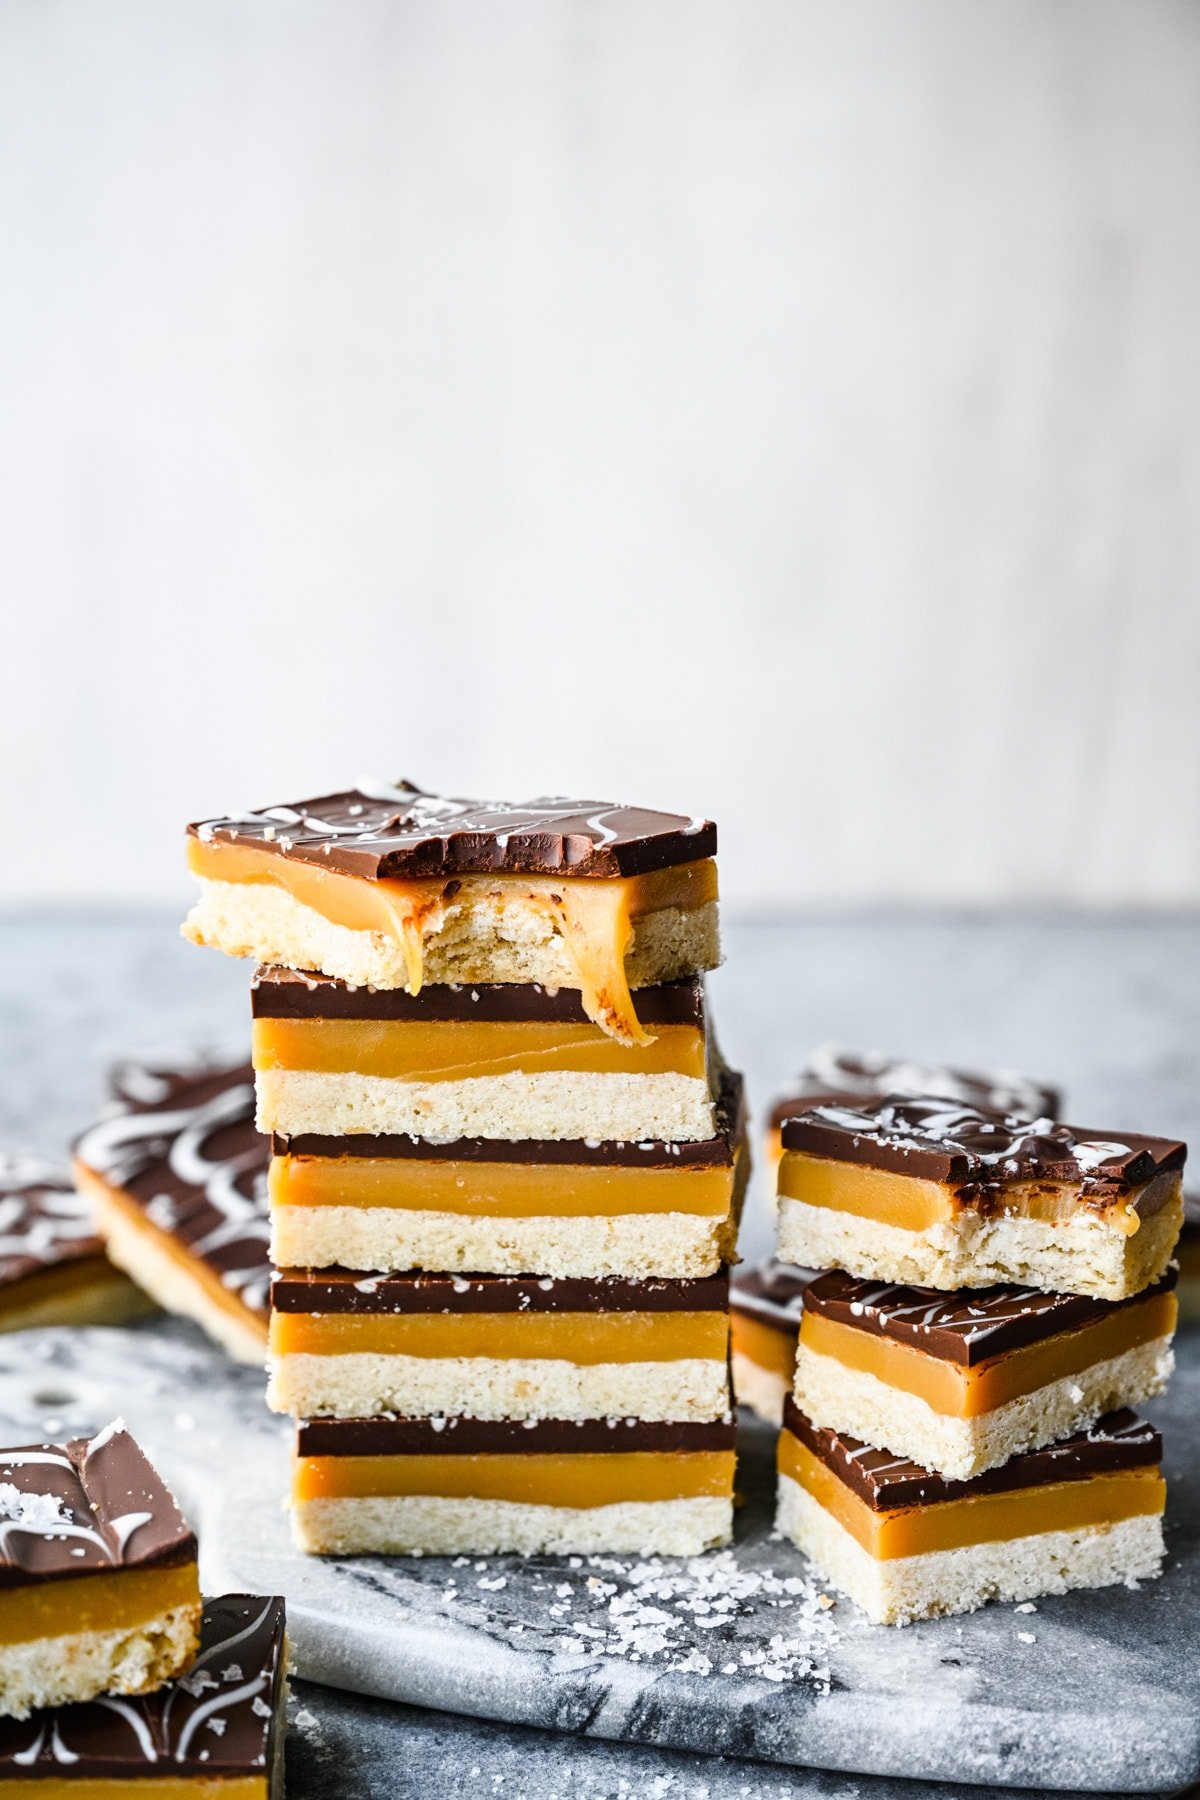 Finished stack of millionaires shortbread showing all the layers.